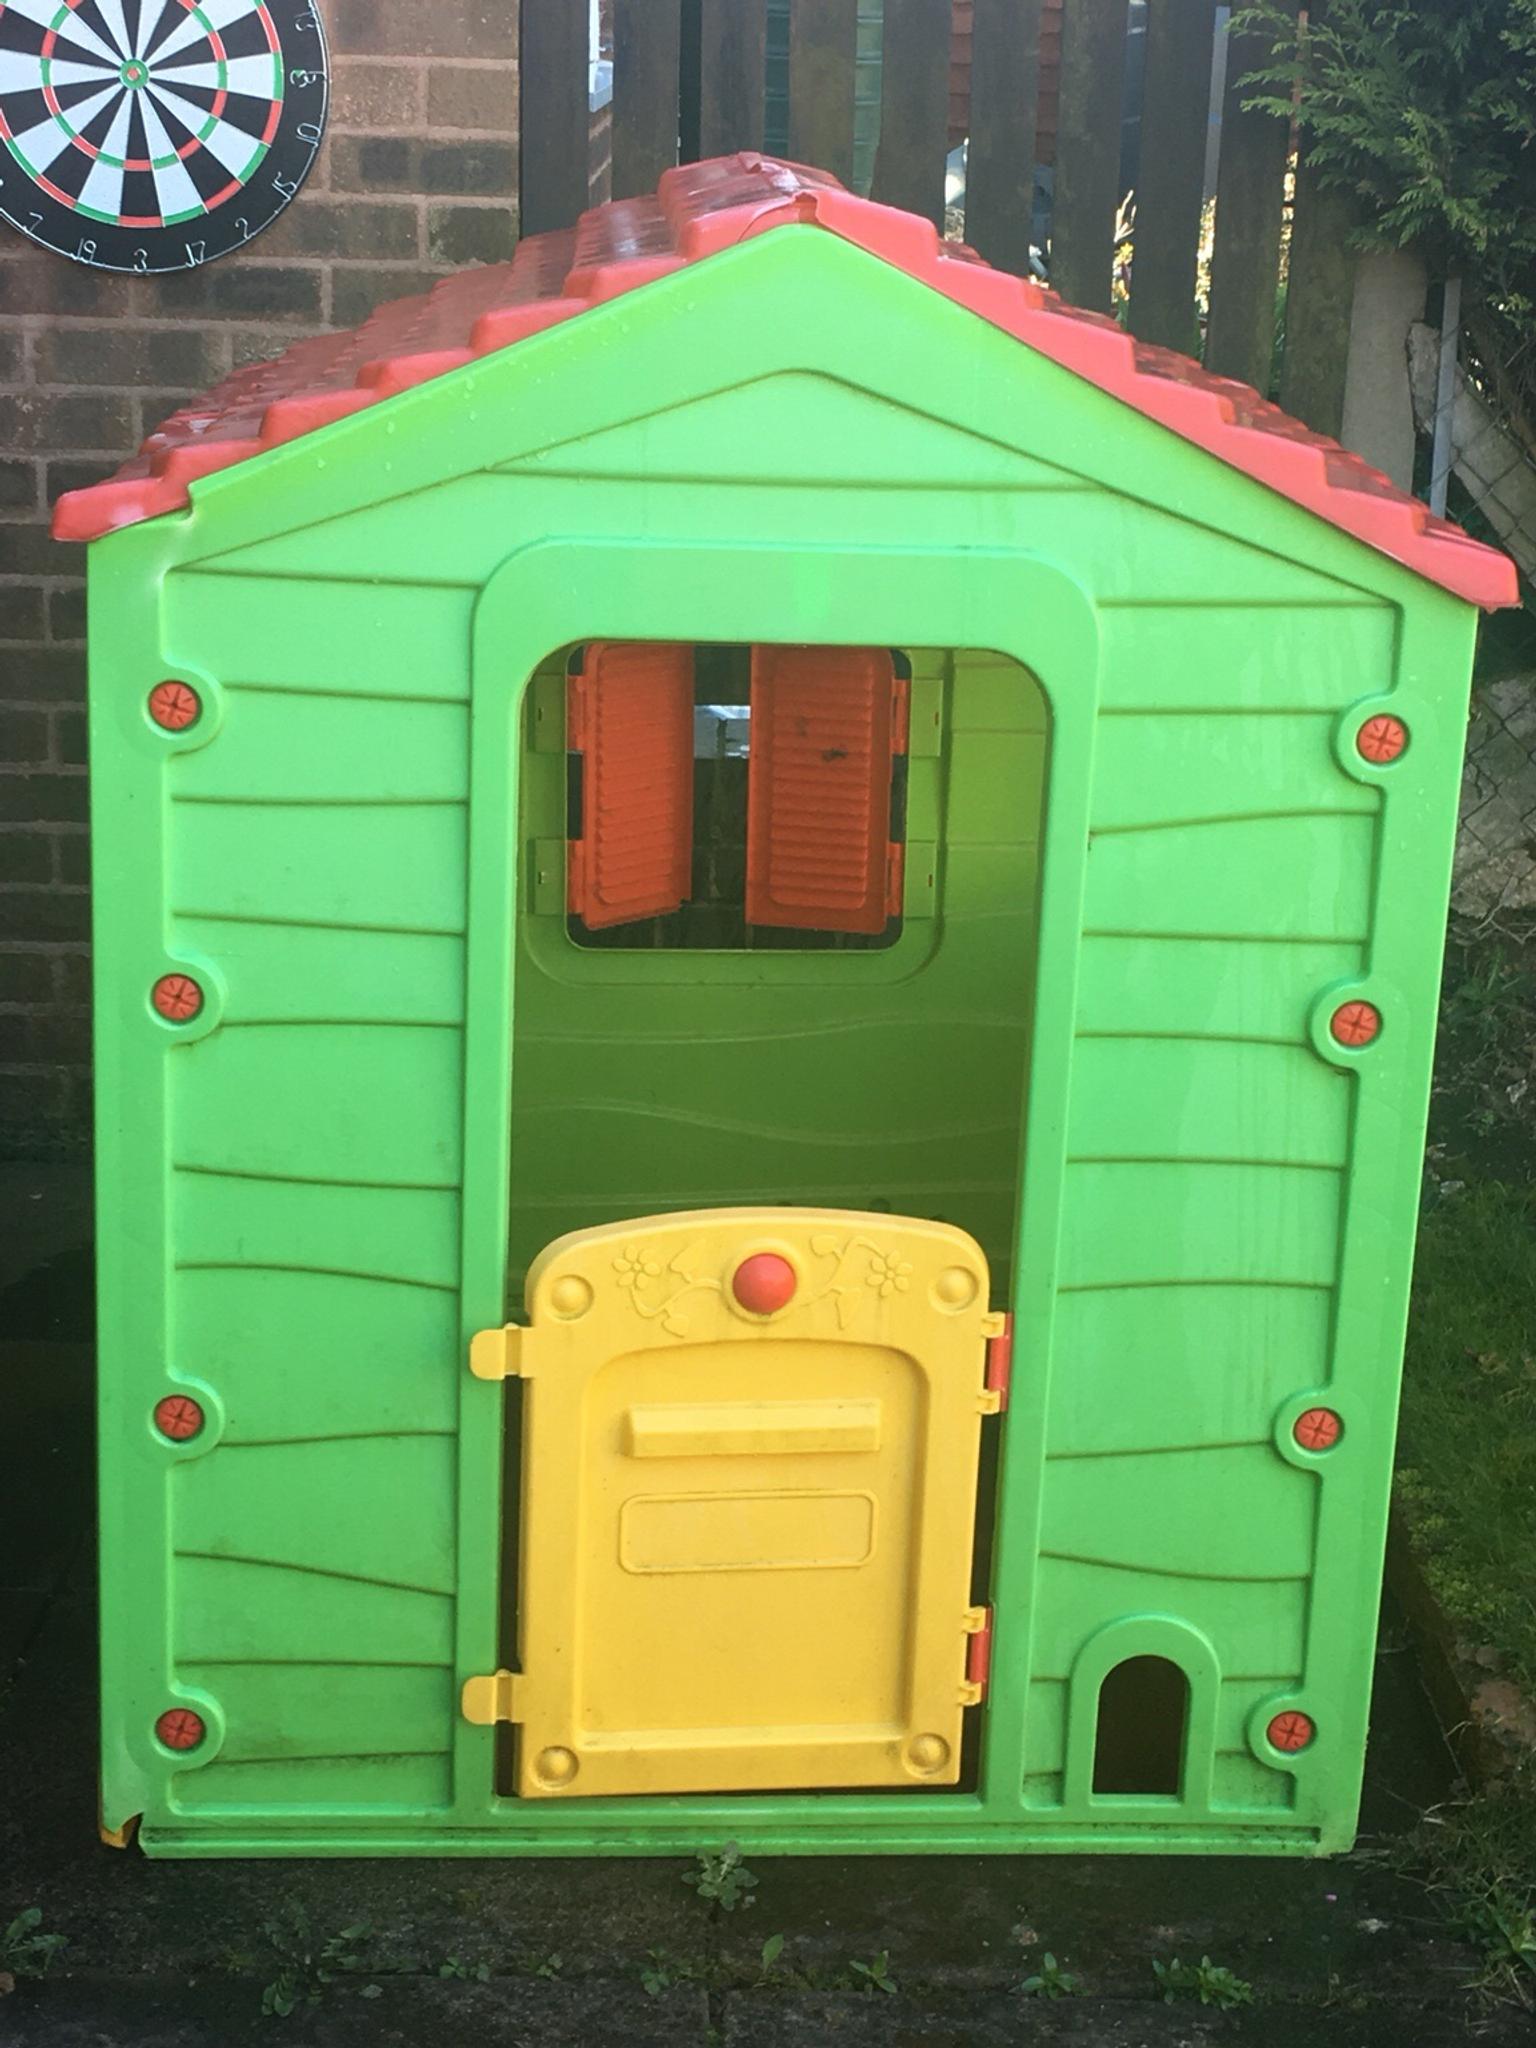 toys r us outdoor playhouse